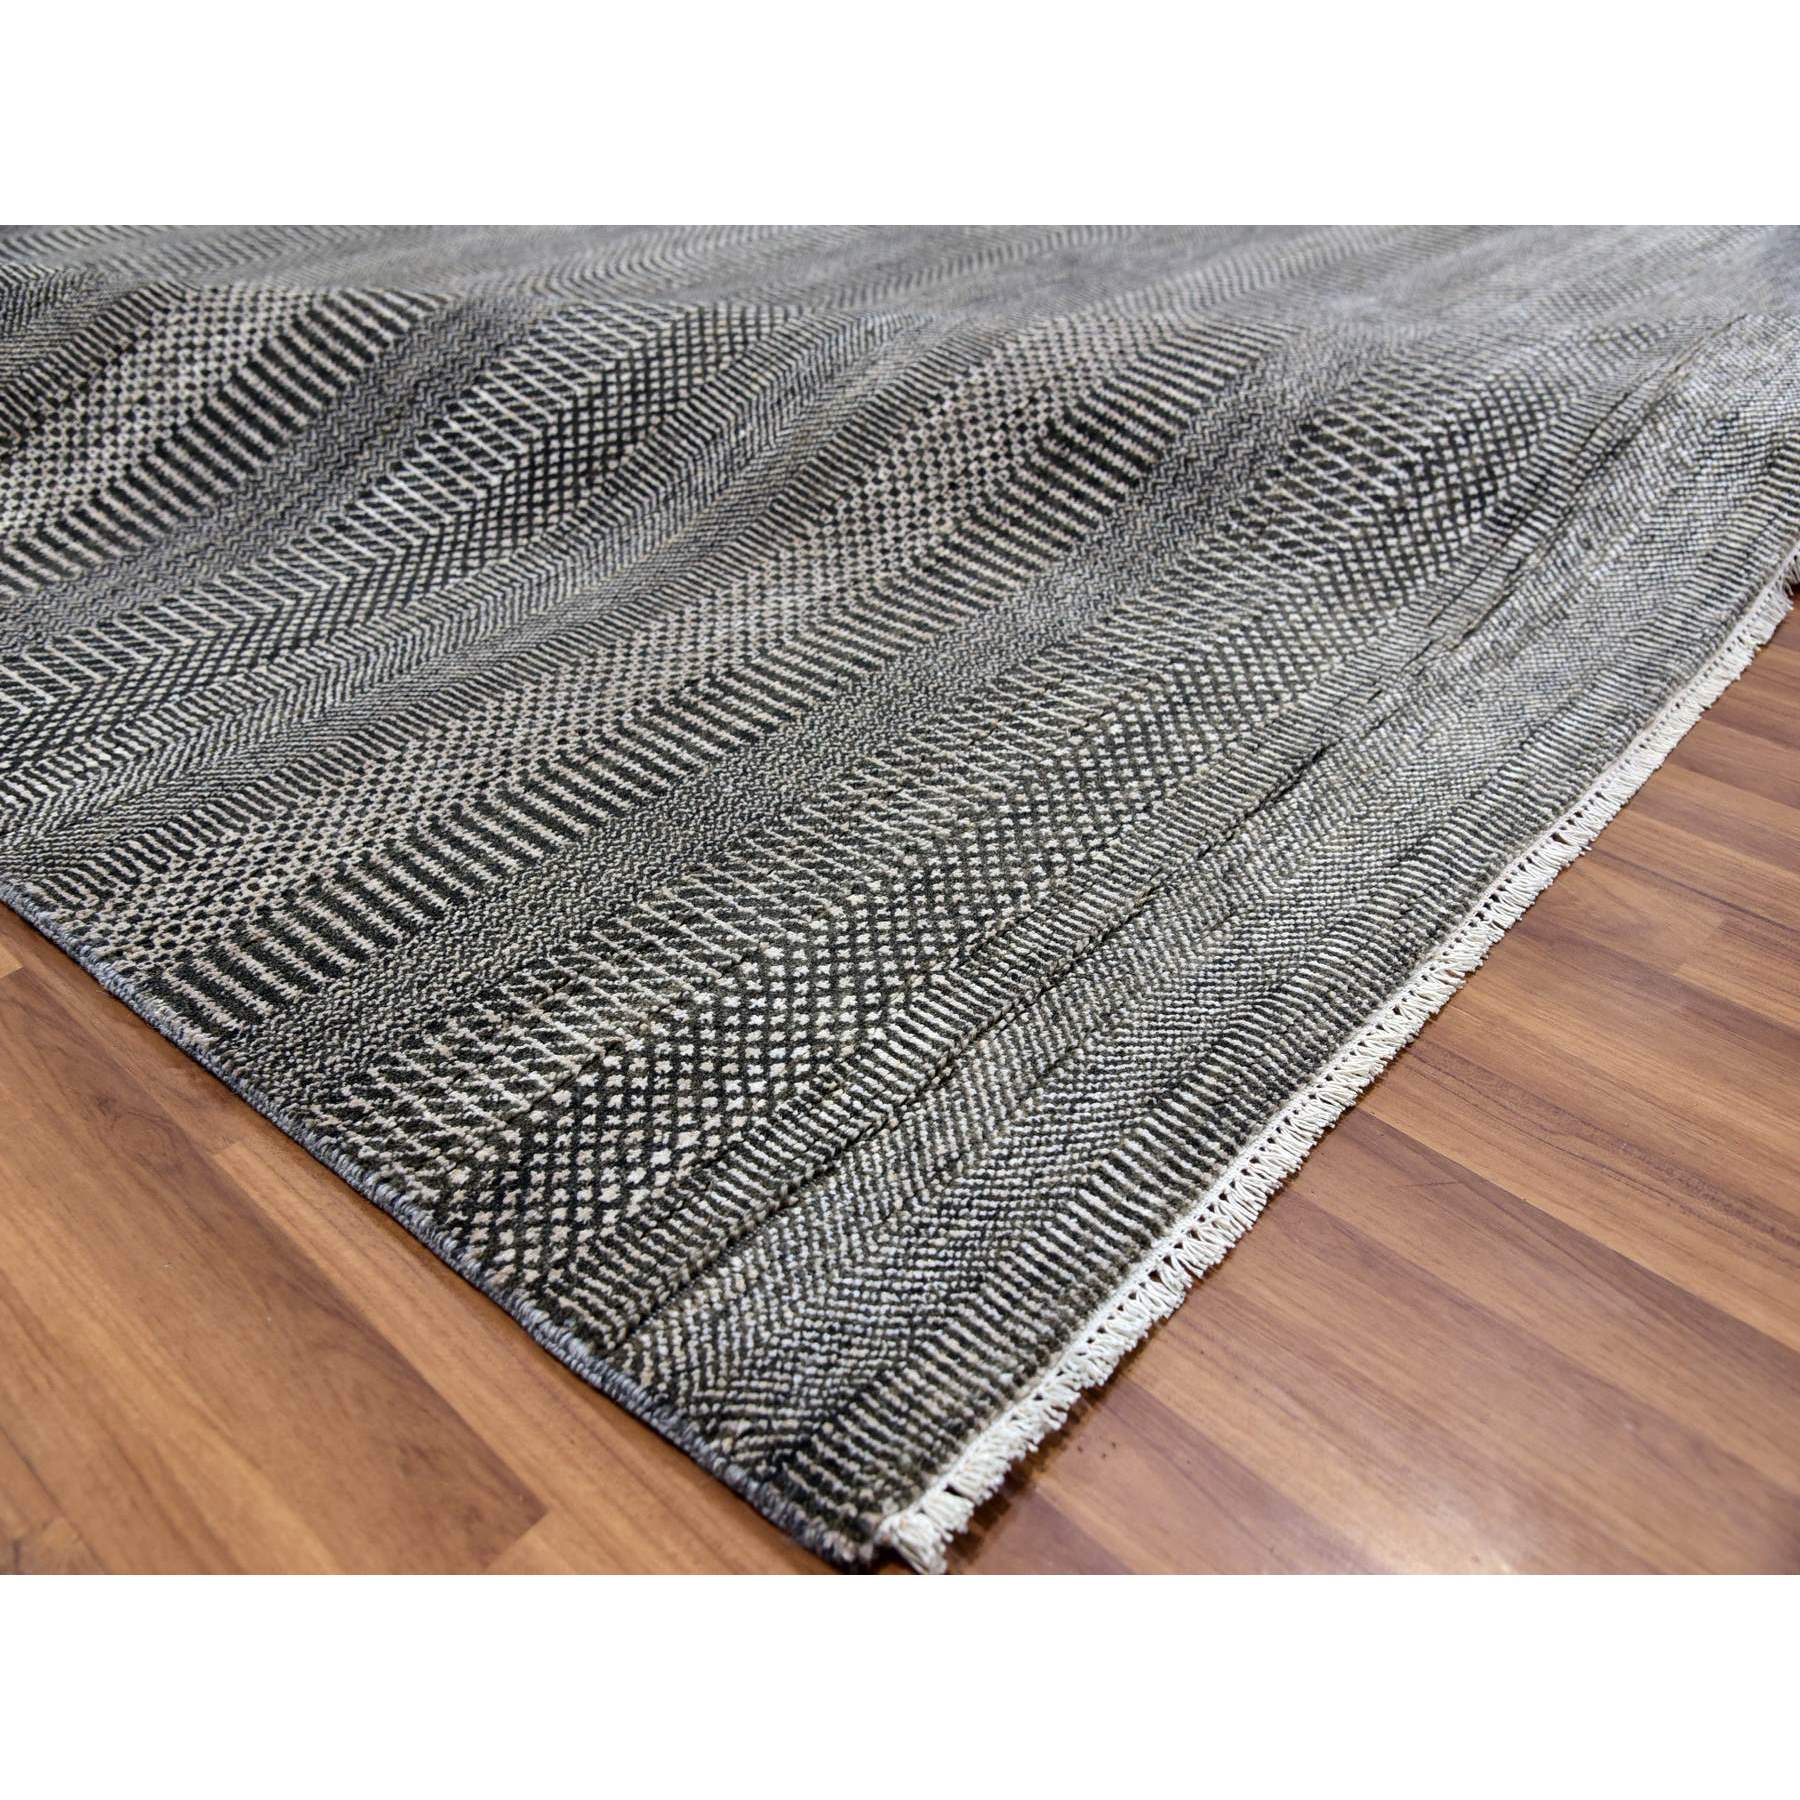 8'1"x10'3" Davy's Gray, Dyed Densely Woven Tone on Tone, Soft to the Touch Wool and Silk, Hand Woven Modern Grass Design, Oriental Rug 